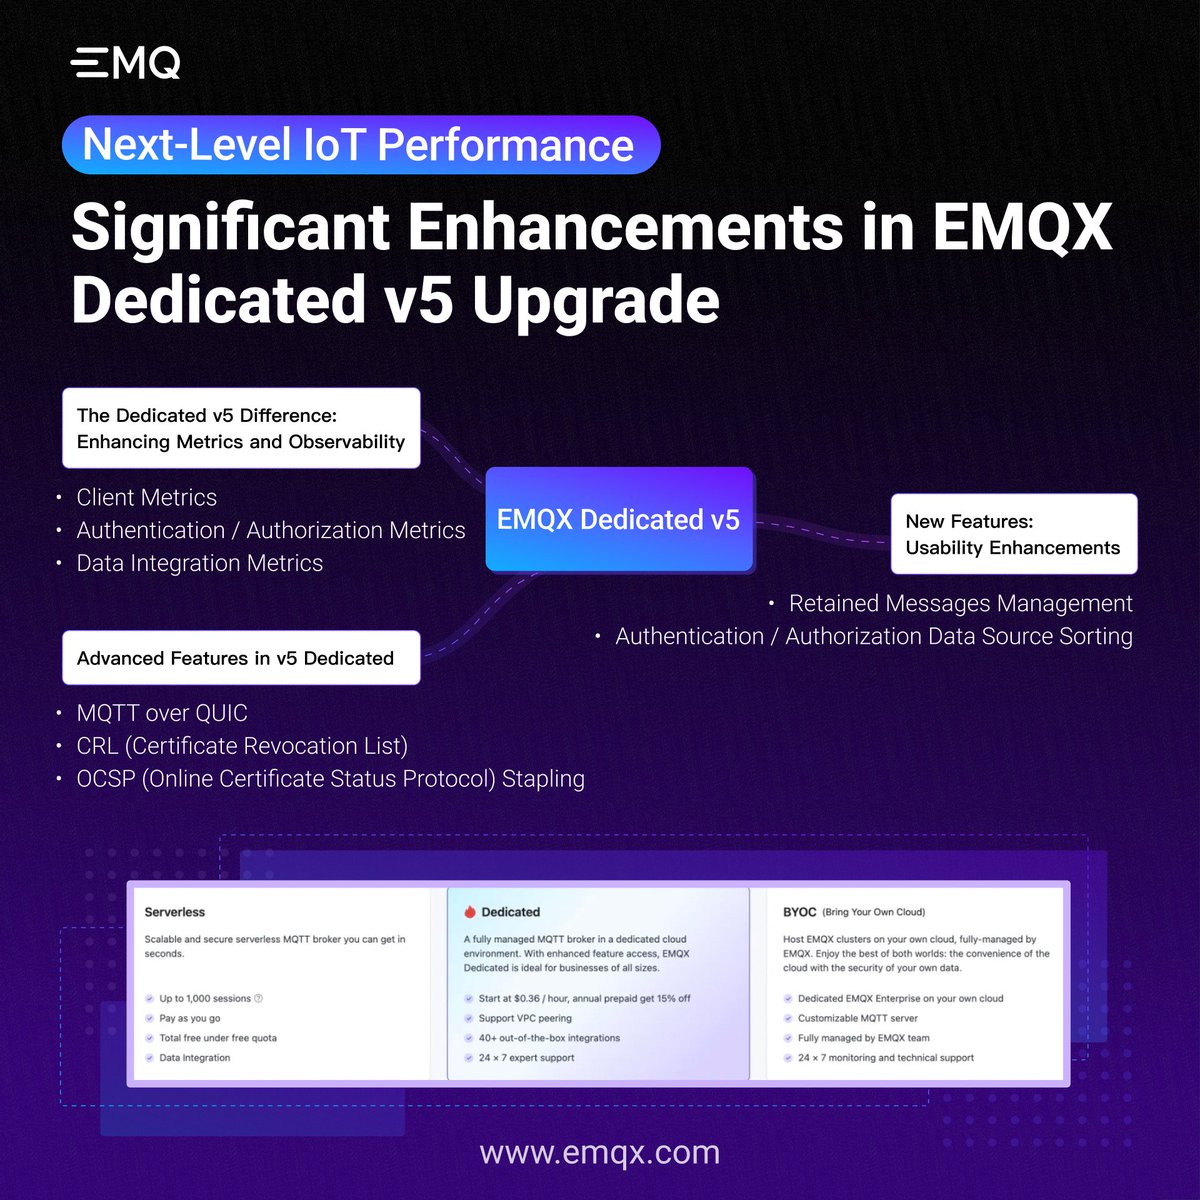 👏EMQX continues to innovate! Our Dedicated v5 upgrade introduces new features and enhances metrics and observability for support in mission-critical #IoT applications. Explore usability improvements and advanced capabilities in our latest blog.⬇️ 🔗 social.emqx.com/u/kzXjEt